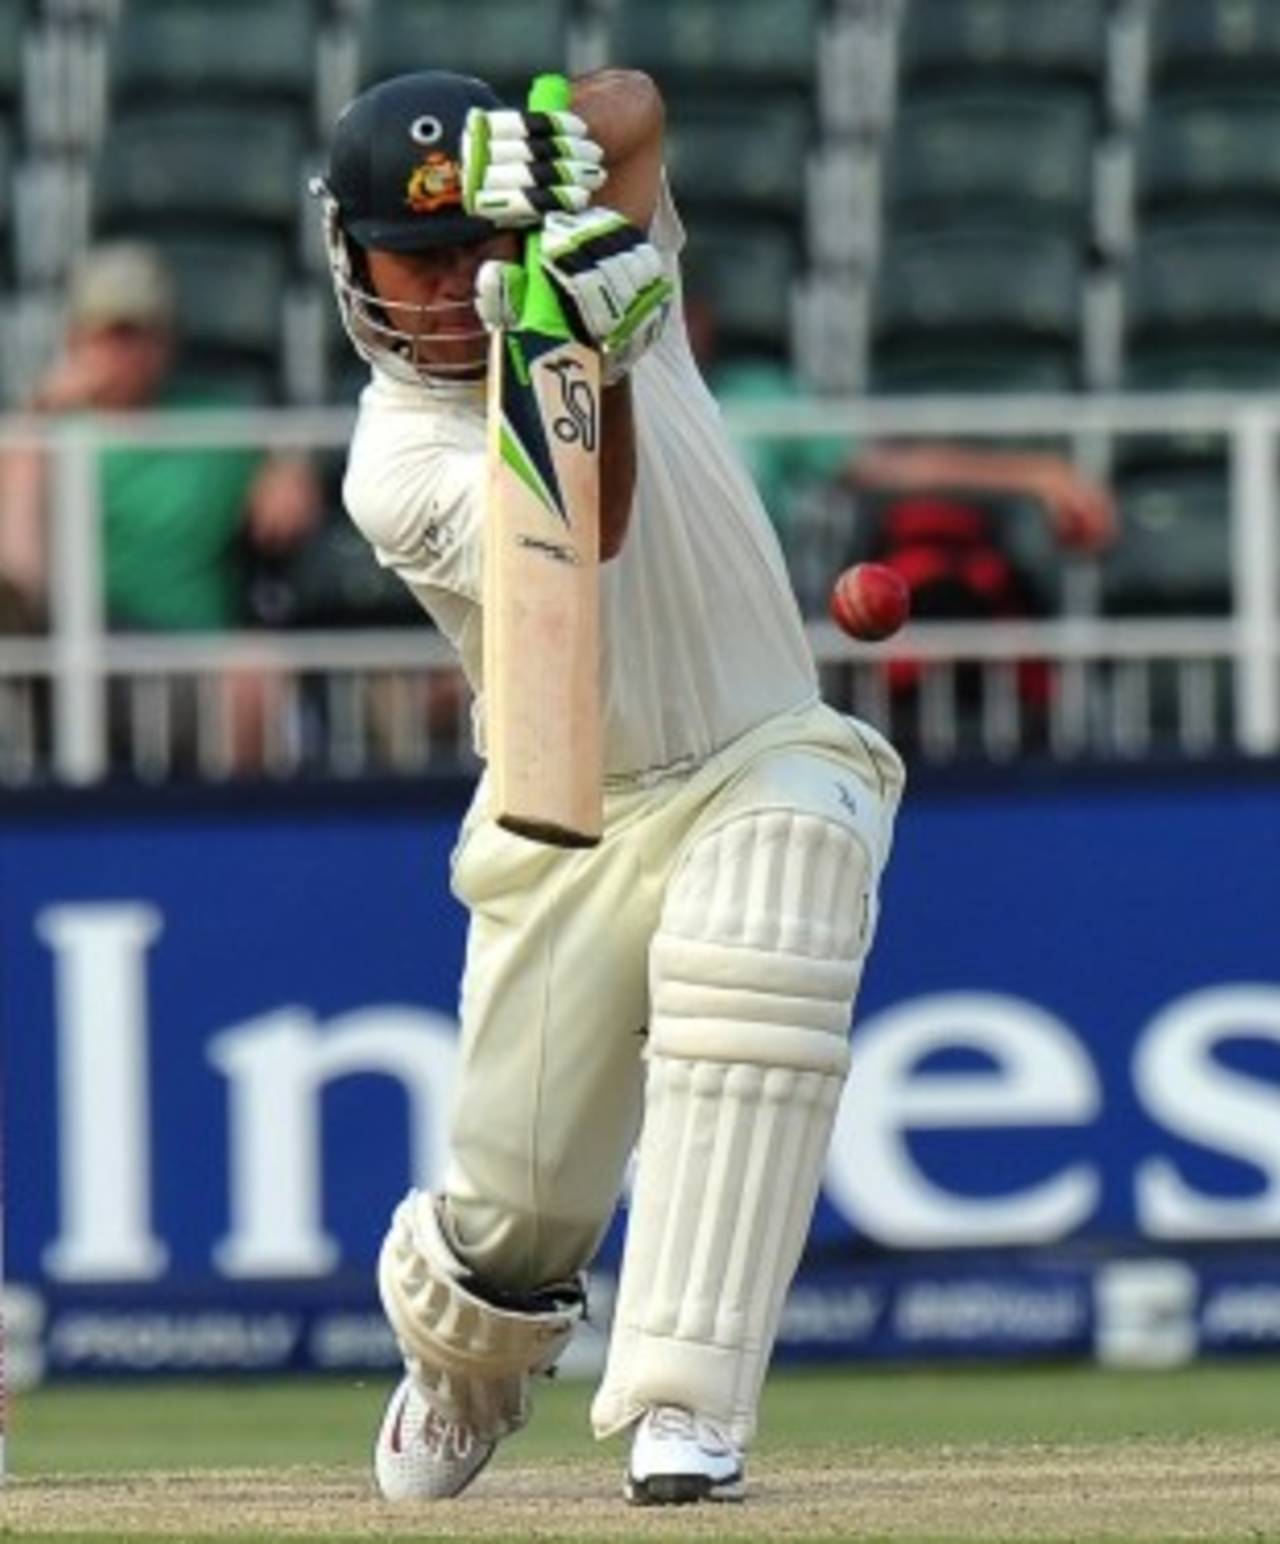 Ricky Ponting ended the fourth day with a half-century, South Africa v Australia, 2nd Test, Johannesburg, 4th day, November 20, 2011